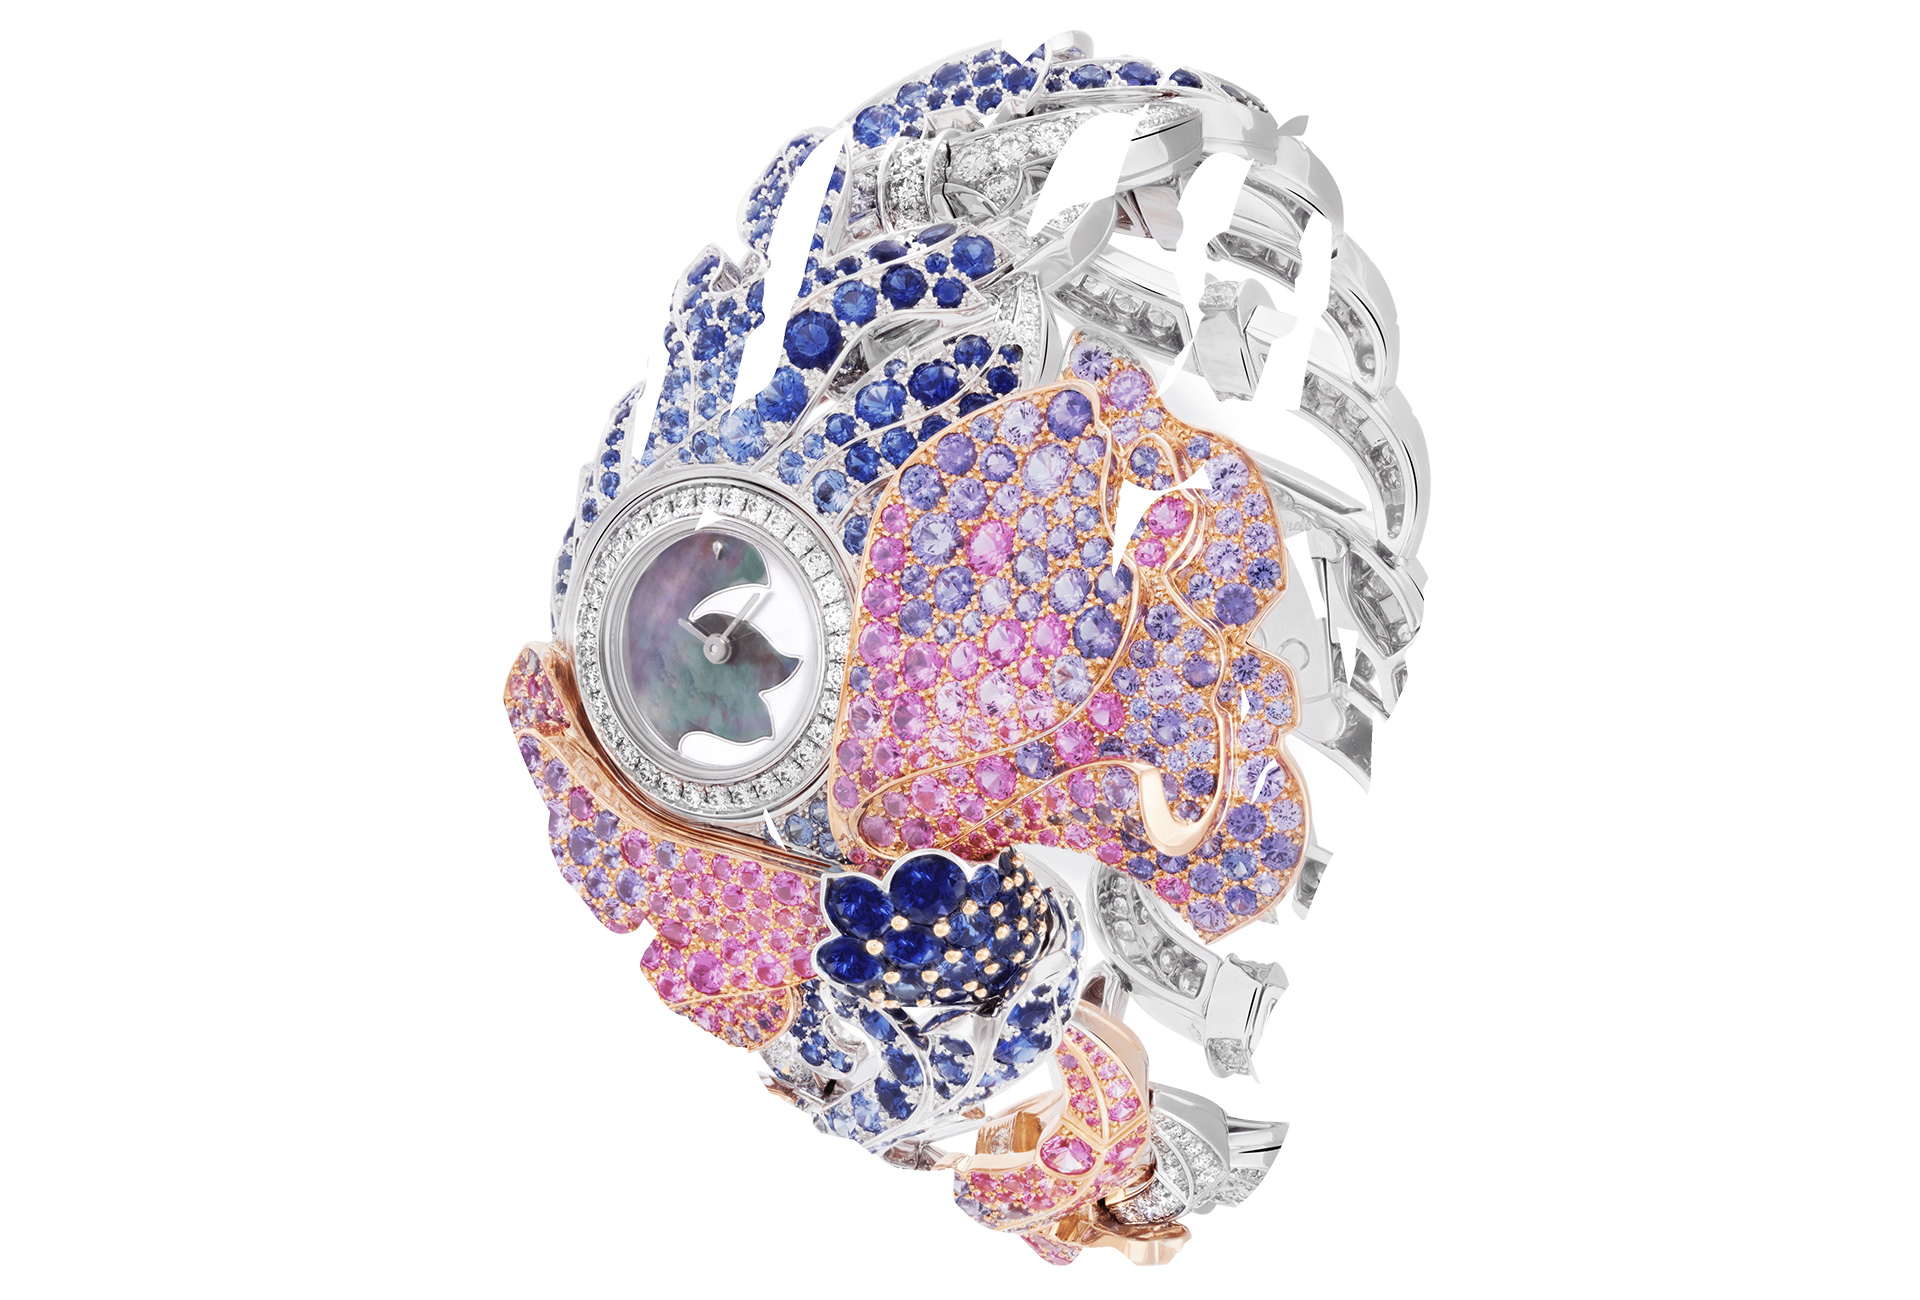 Legendary couples come to life Van Cleef & Arpels – FHH Journal